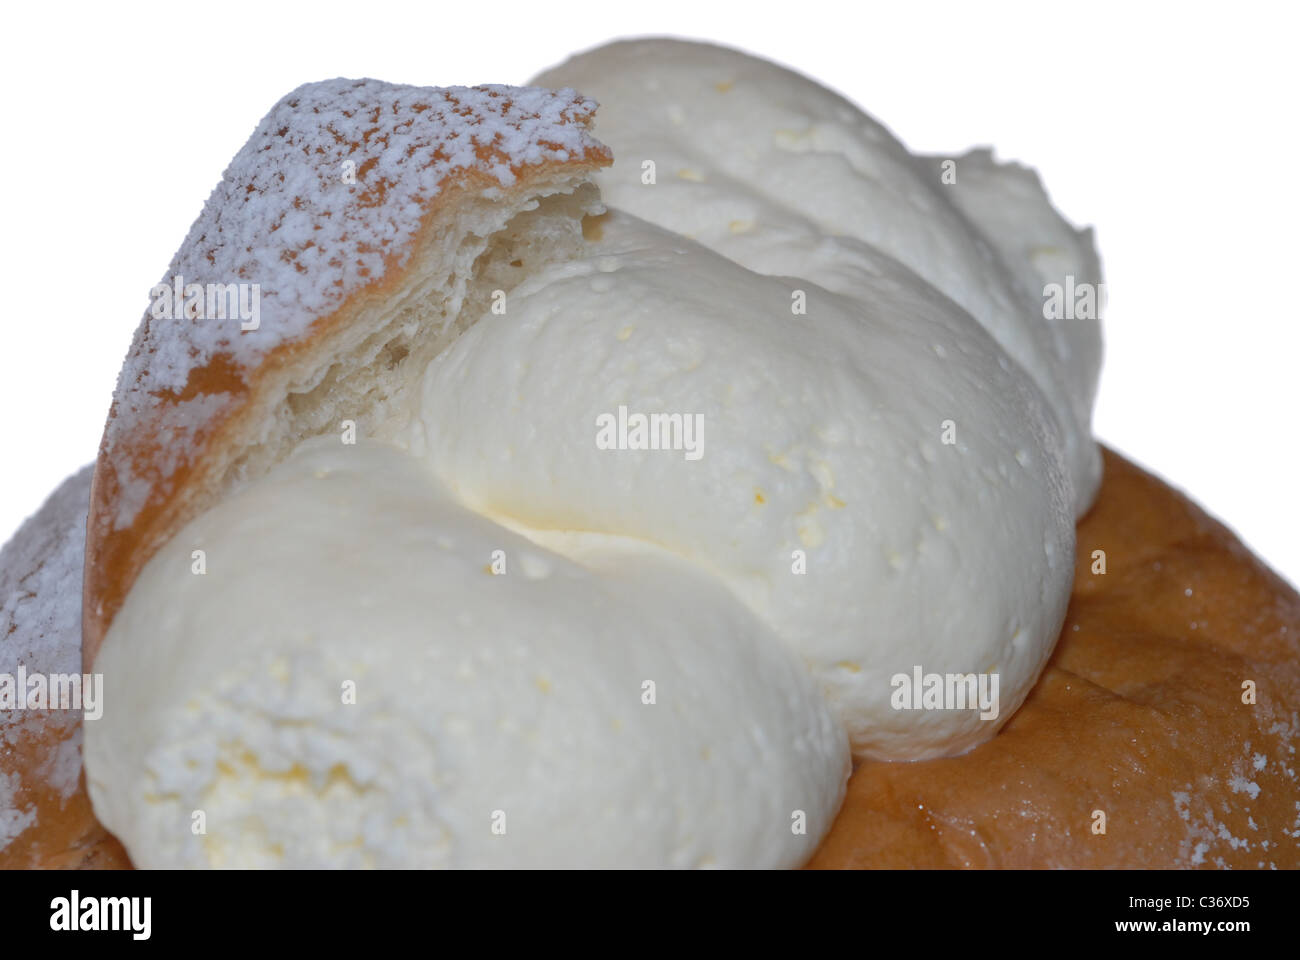 Semla, Swedish Easter bun with whipped cream and almond paste. Stock Photo